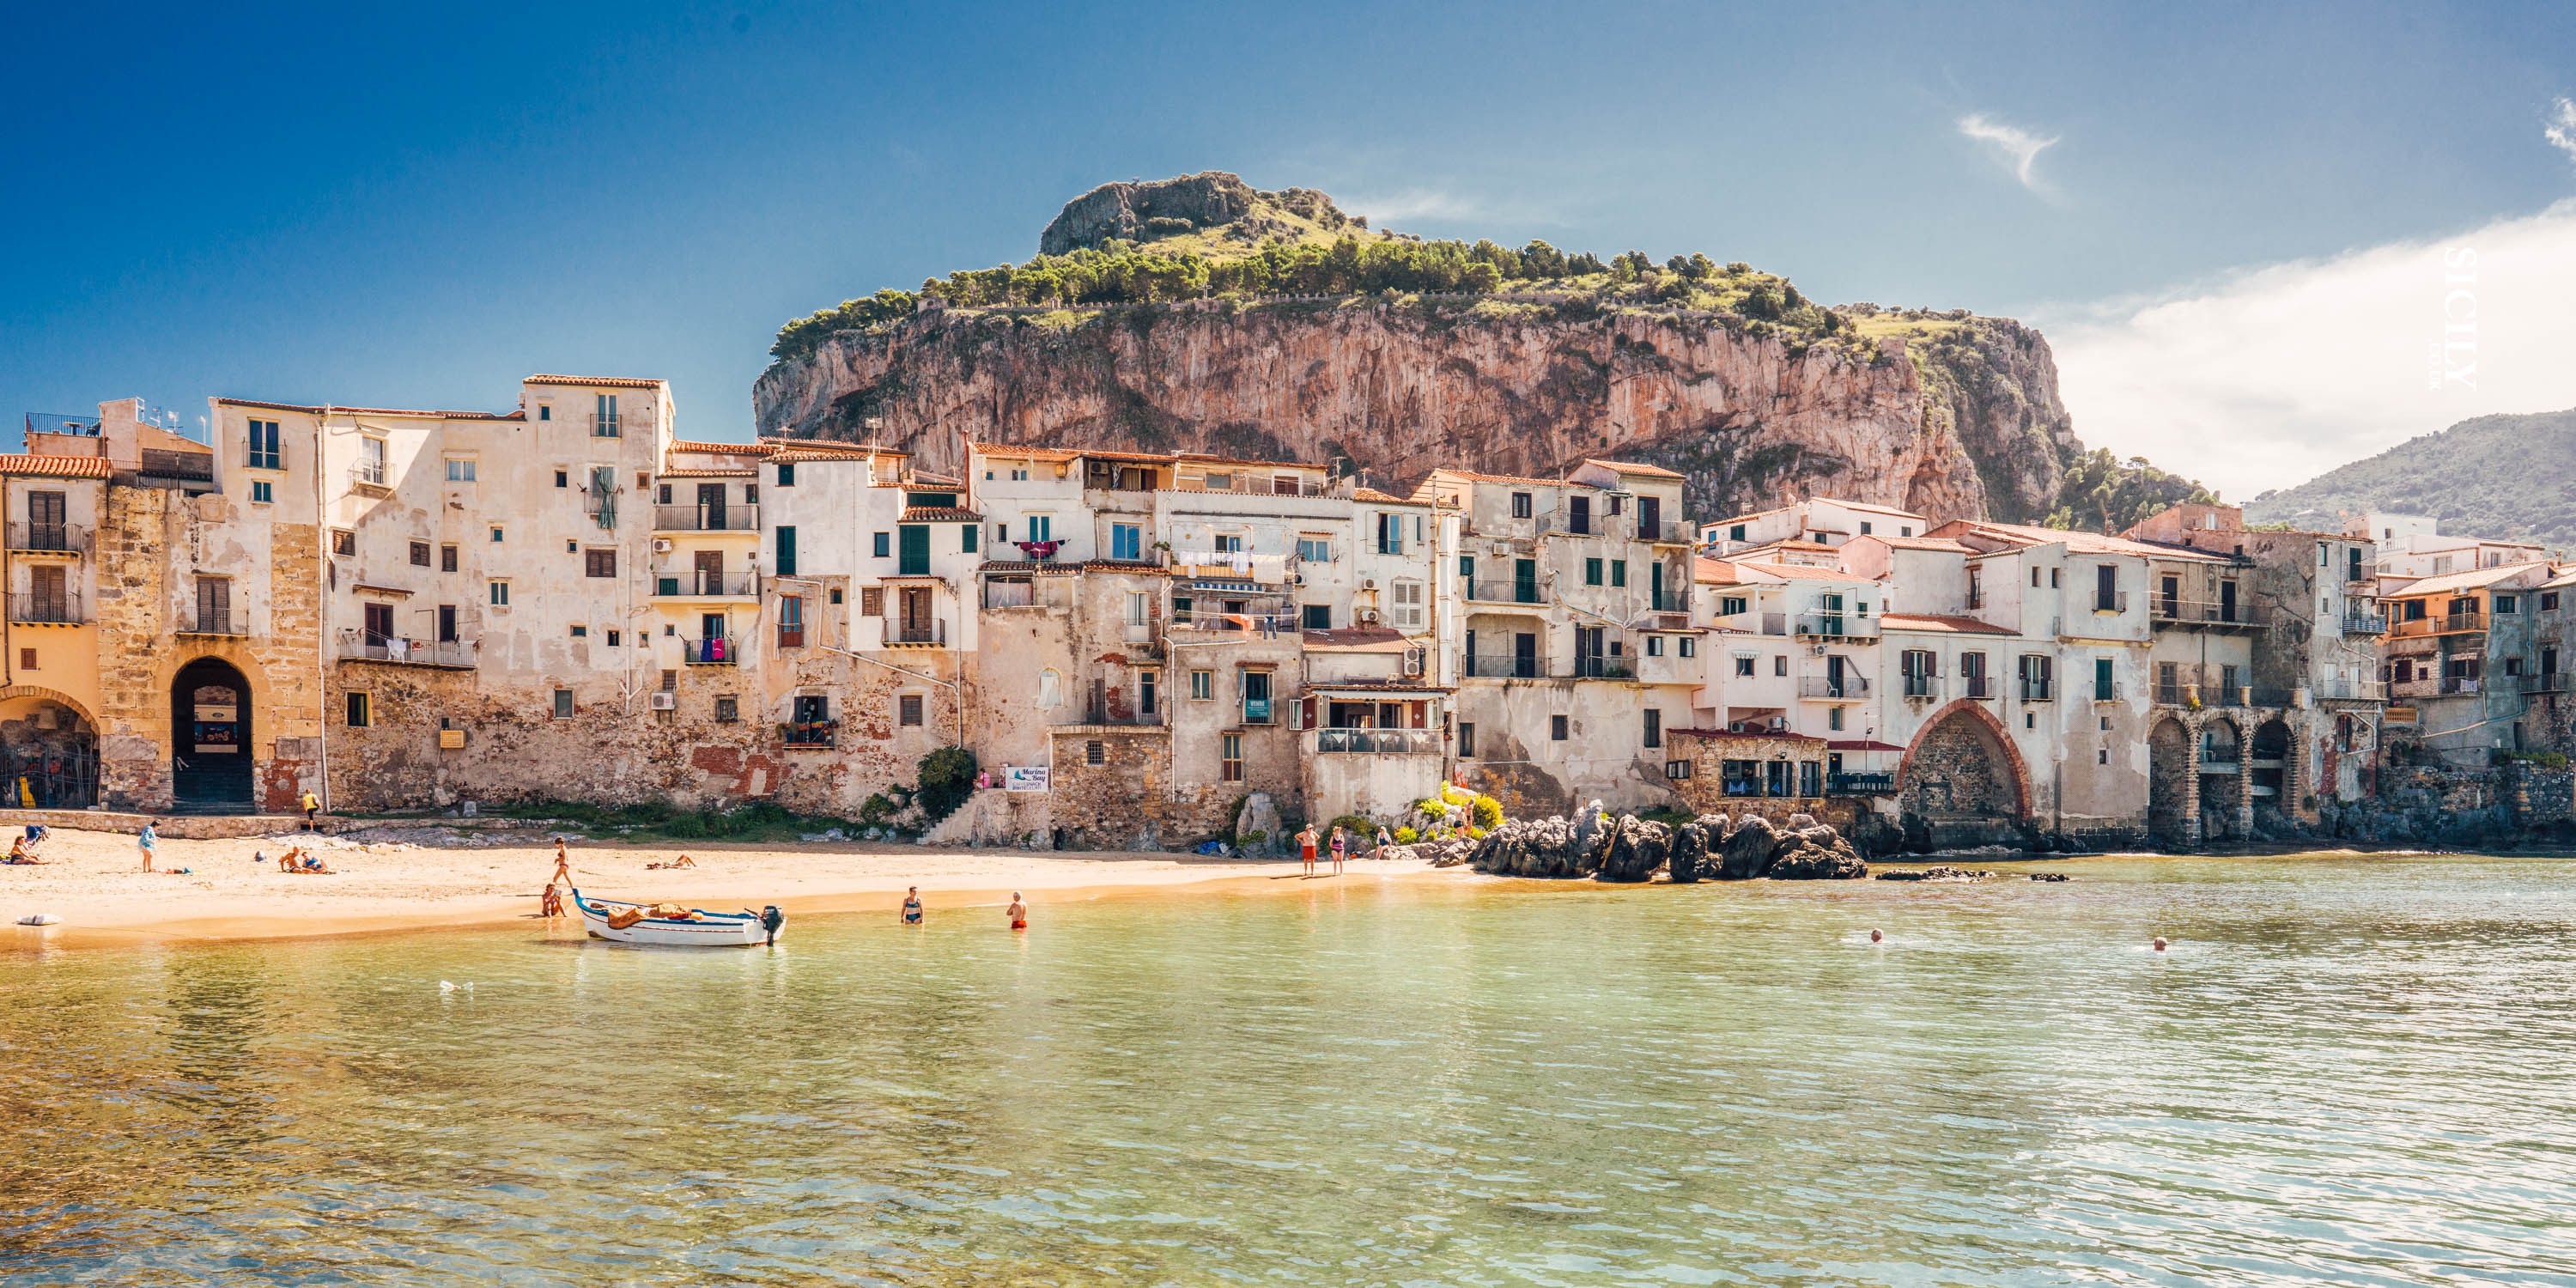 Palermo, Sicily, Italy, 5 things, Sicily Holiday